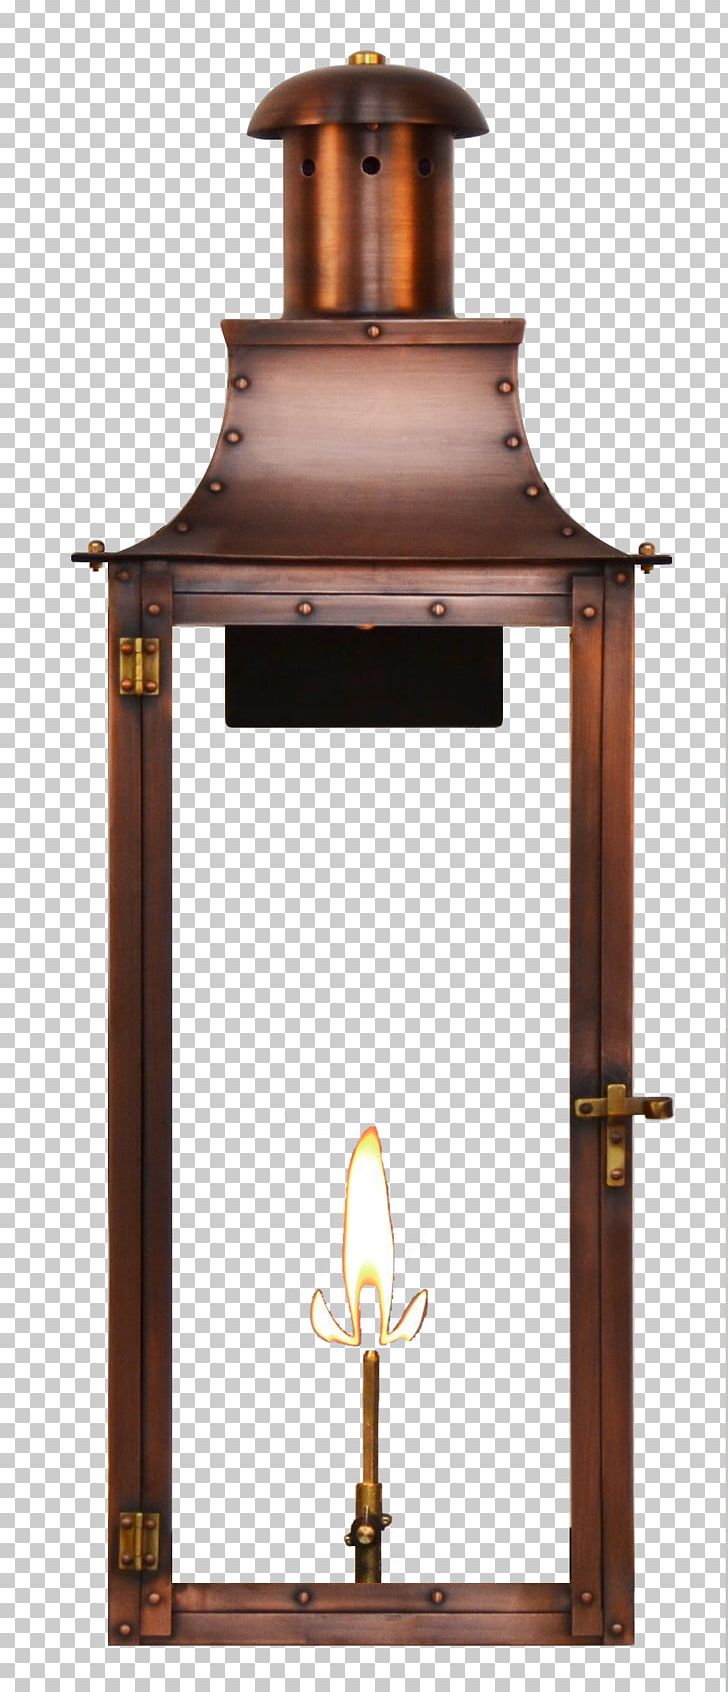 Landscape Lighting Lantern Sconce PNG, Clipart, Ceiling Fixture, Copper, Coppersmith, Electrical Filament, Electricity Free PNG Download